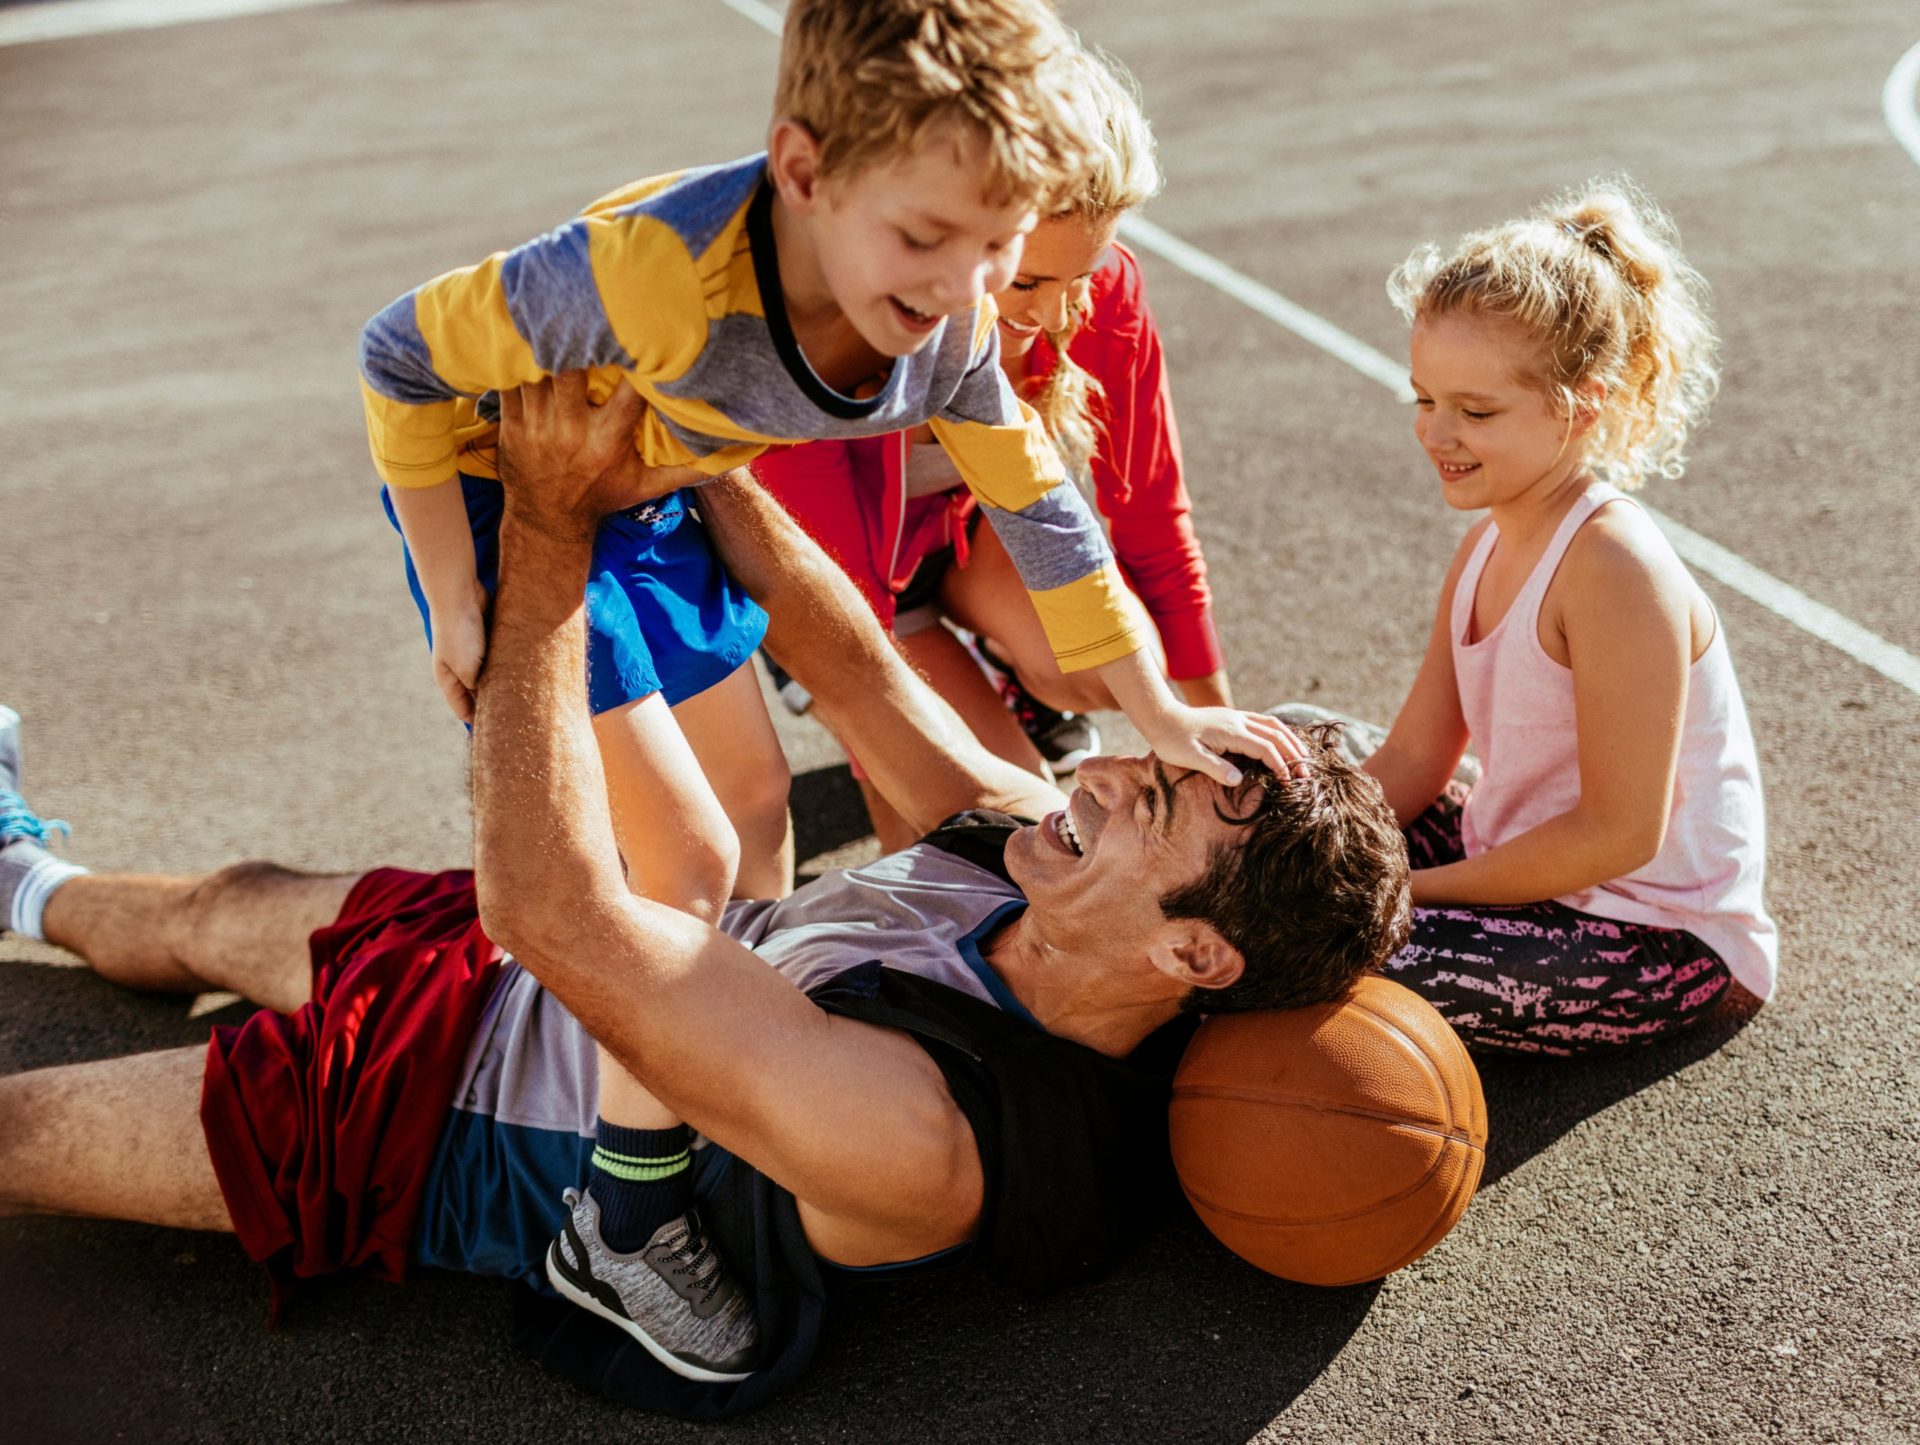 Family plays together on a basketball court